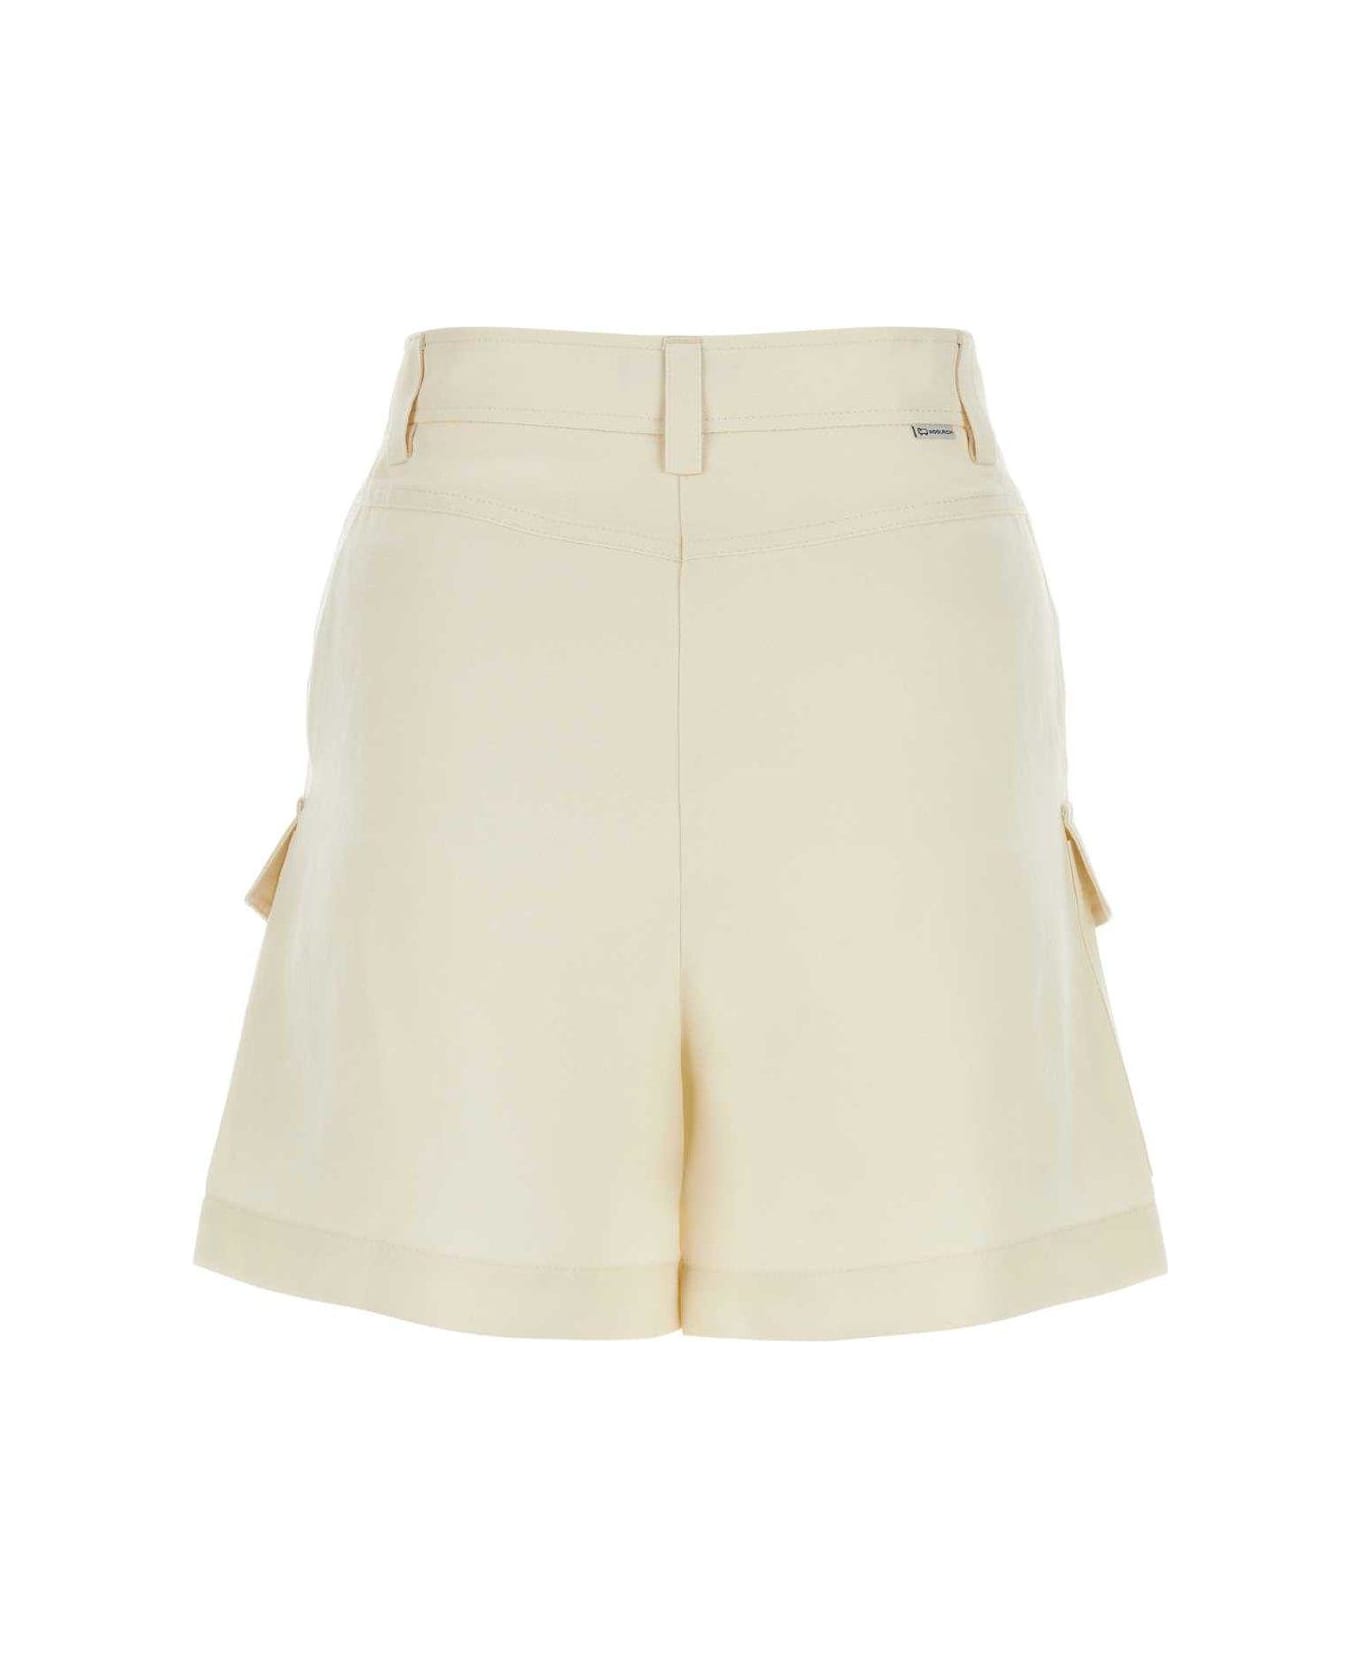 Woolrich Pleat-detailed Shorts - White